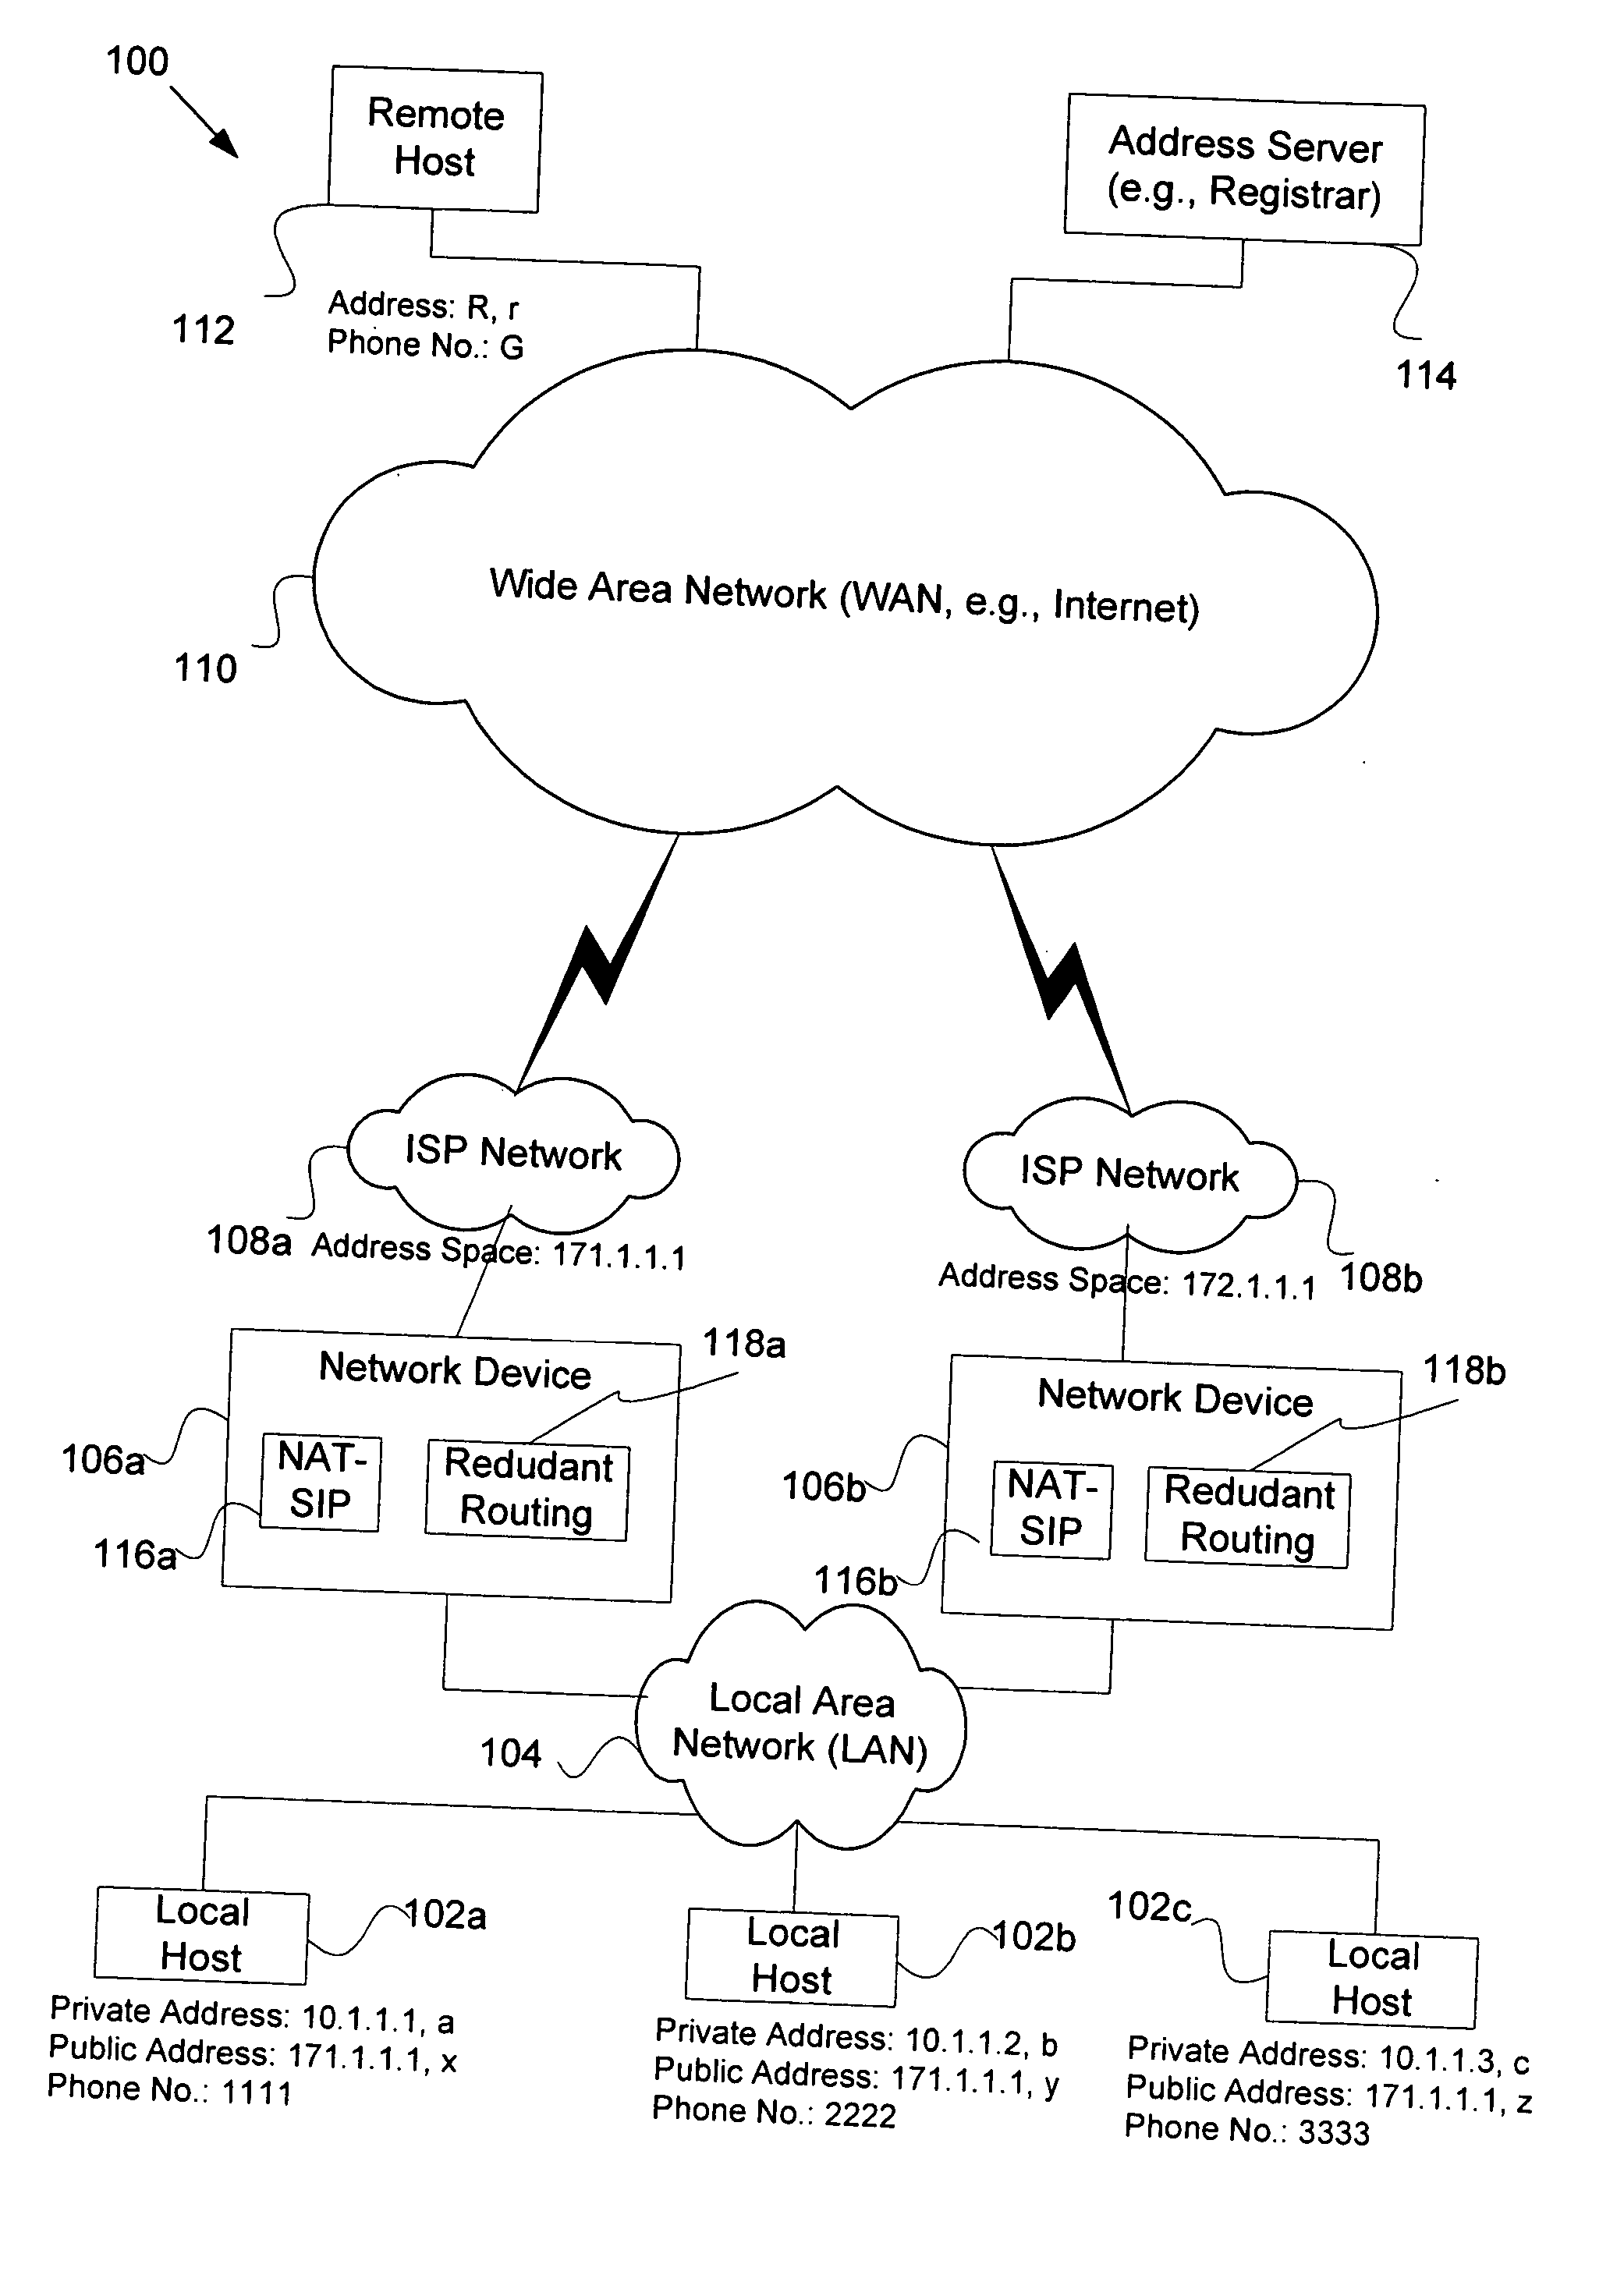 Mechanisms for providing connectivity in NAT redundant/fail-over scenarios in unshared address-space